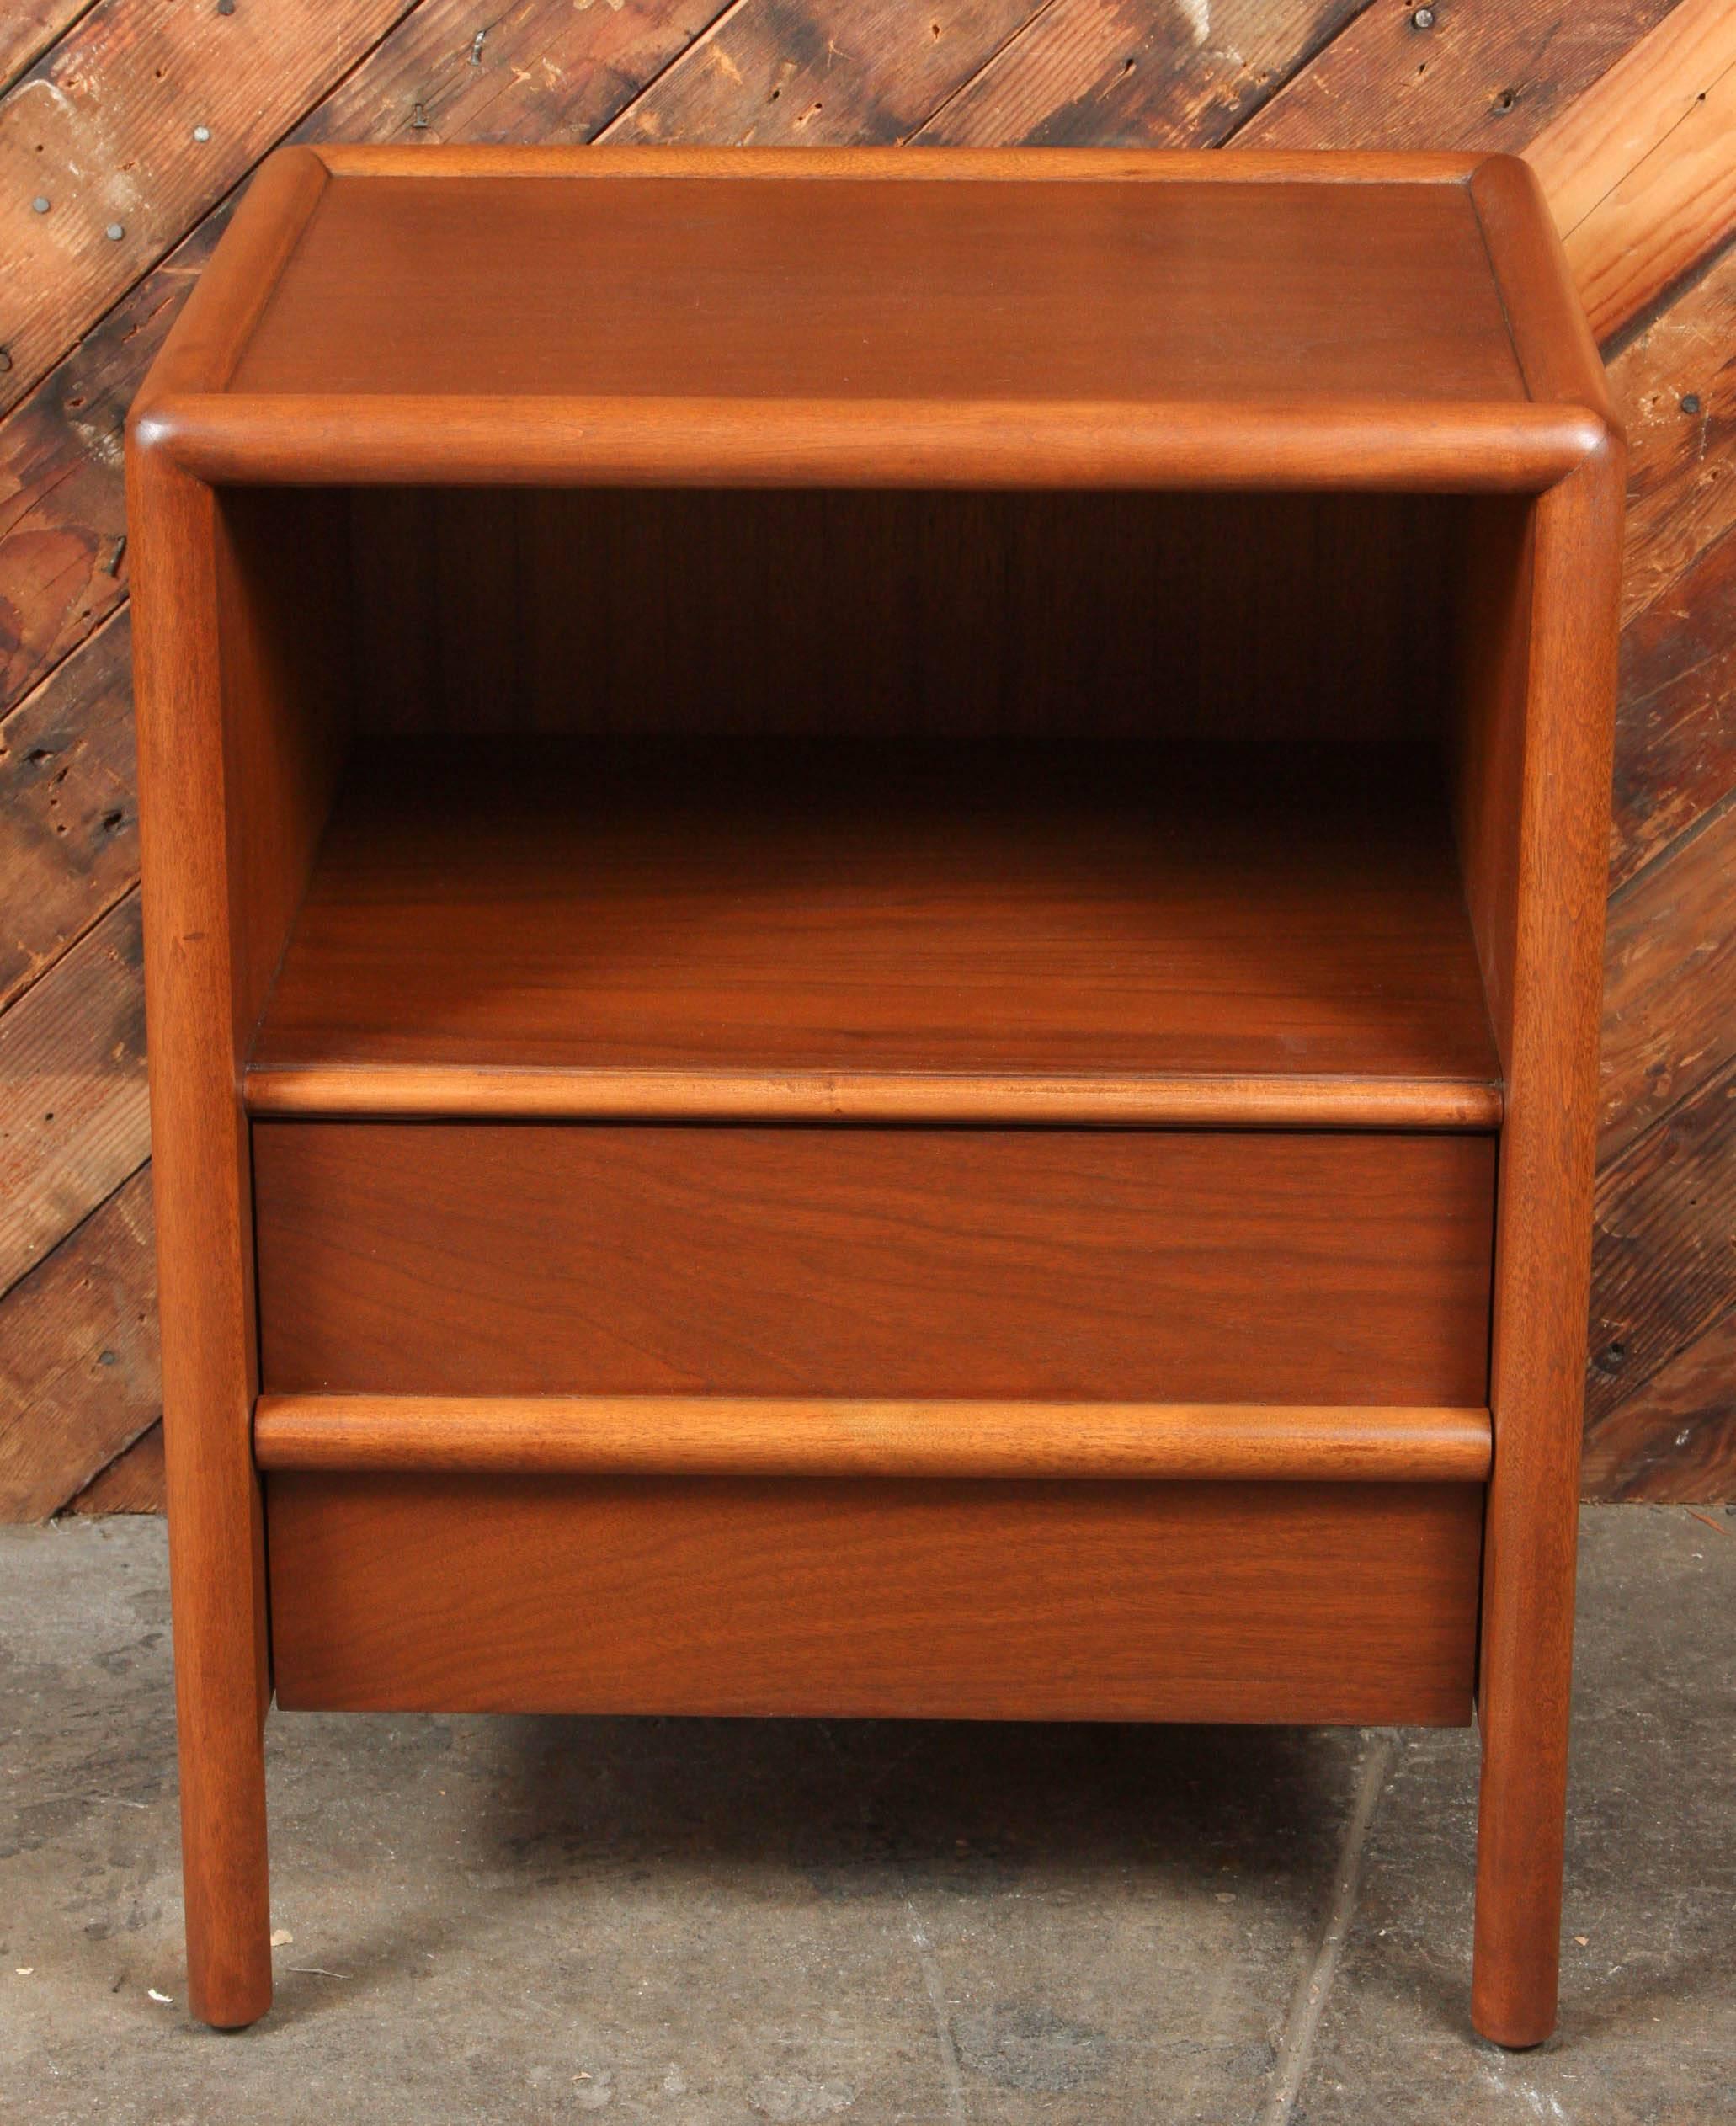 Gorgeous refinished T.H. Robsjohn-Gibbings nightstand, by Widdicomb, 1950s, walnut, open storage over one-drawer, original finish, Widdicomb label in drawer.